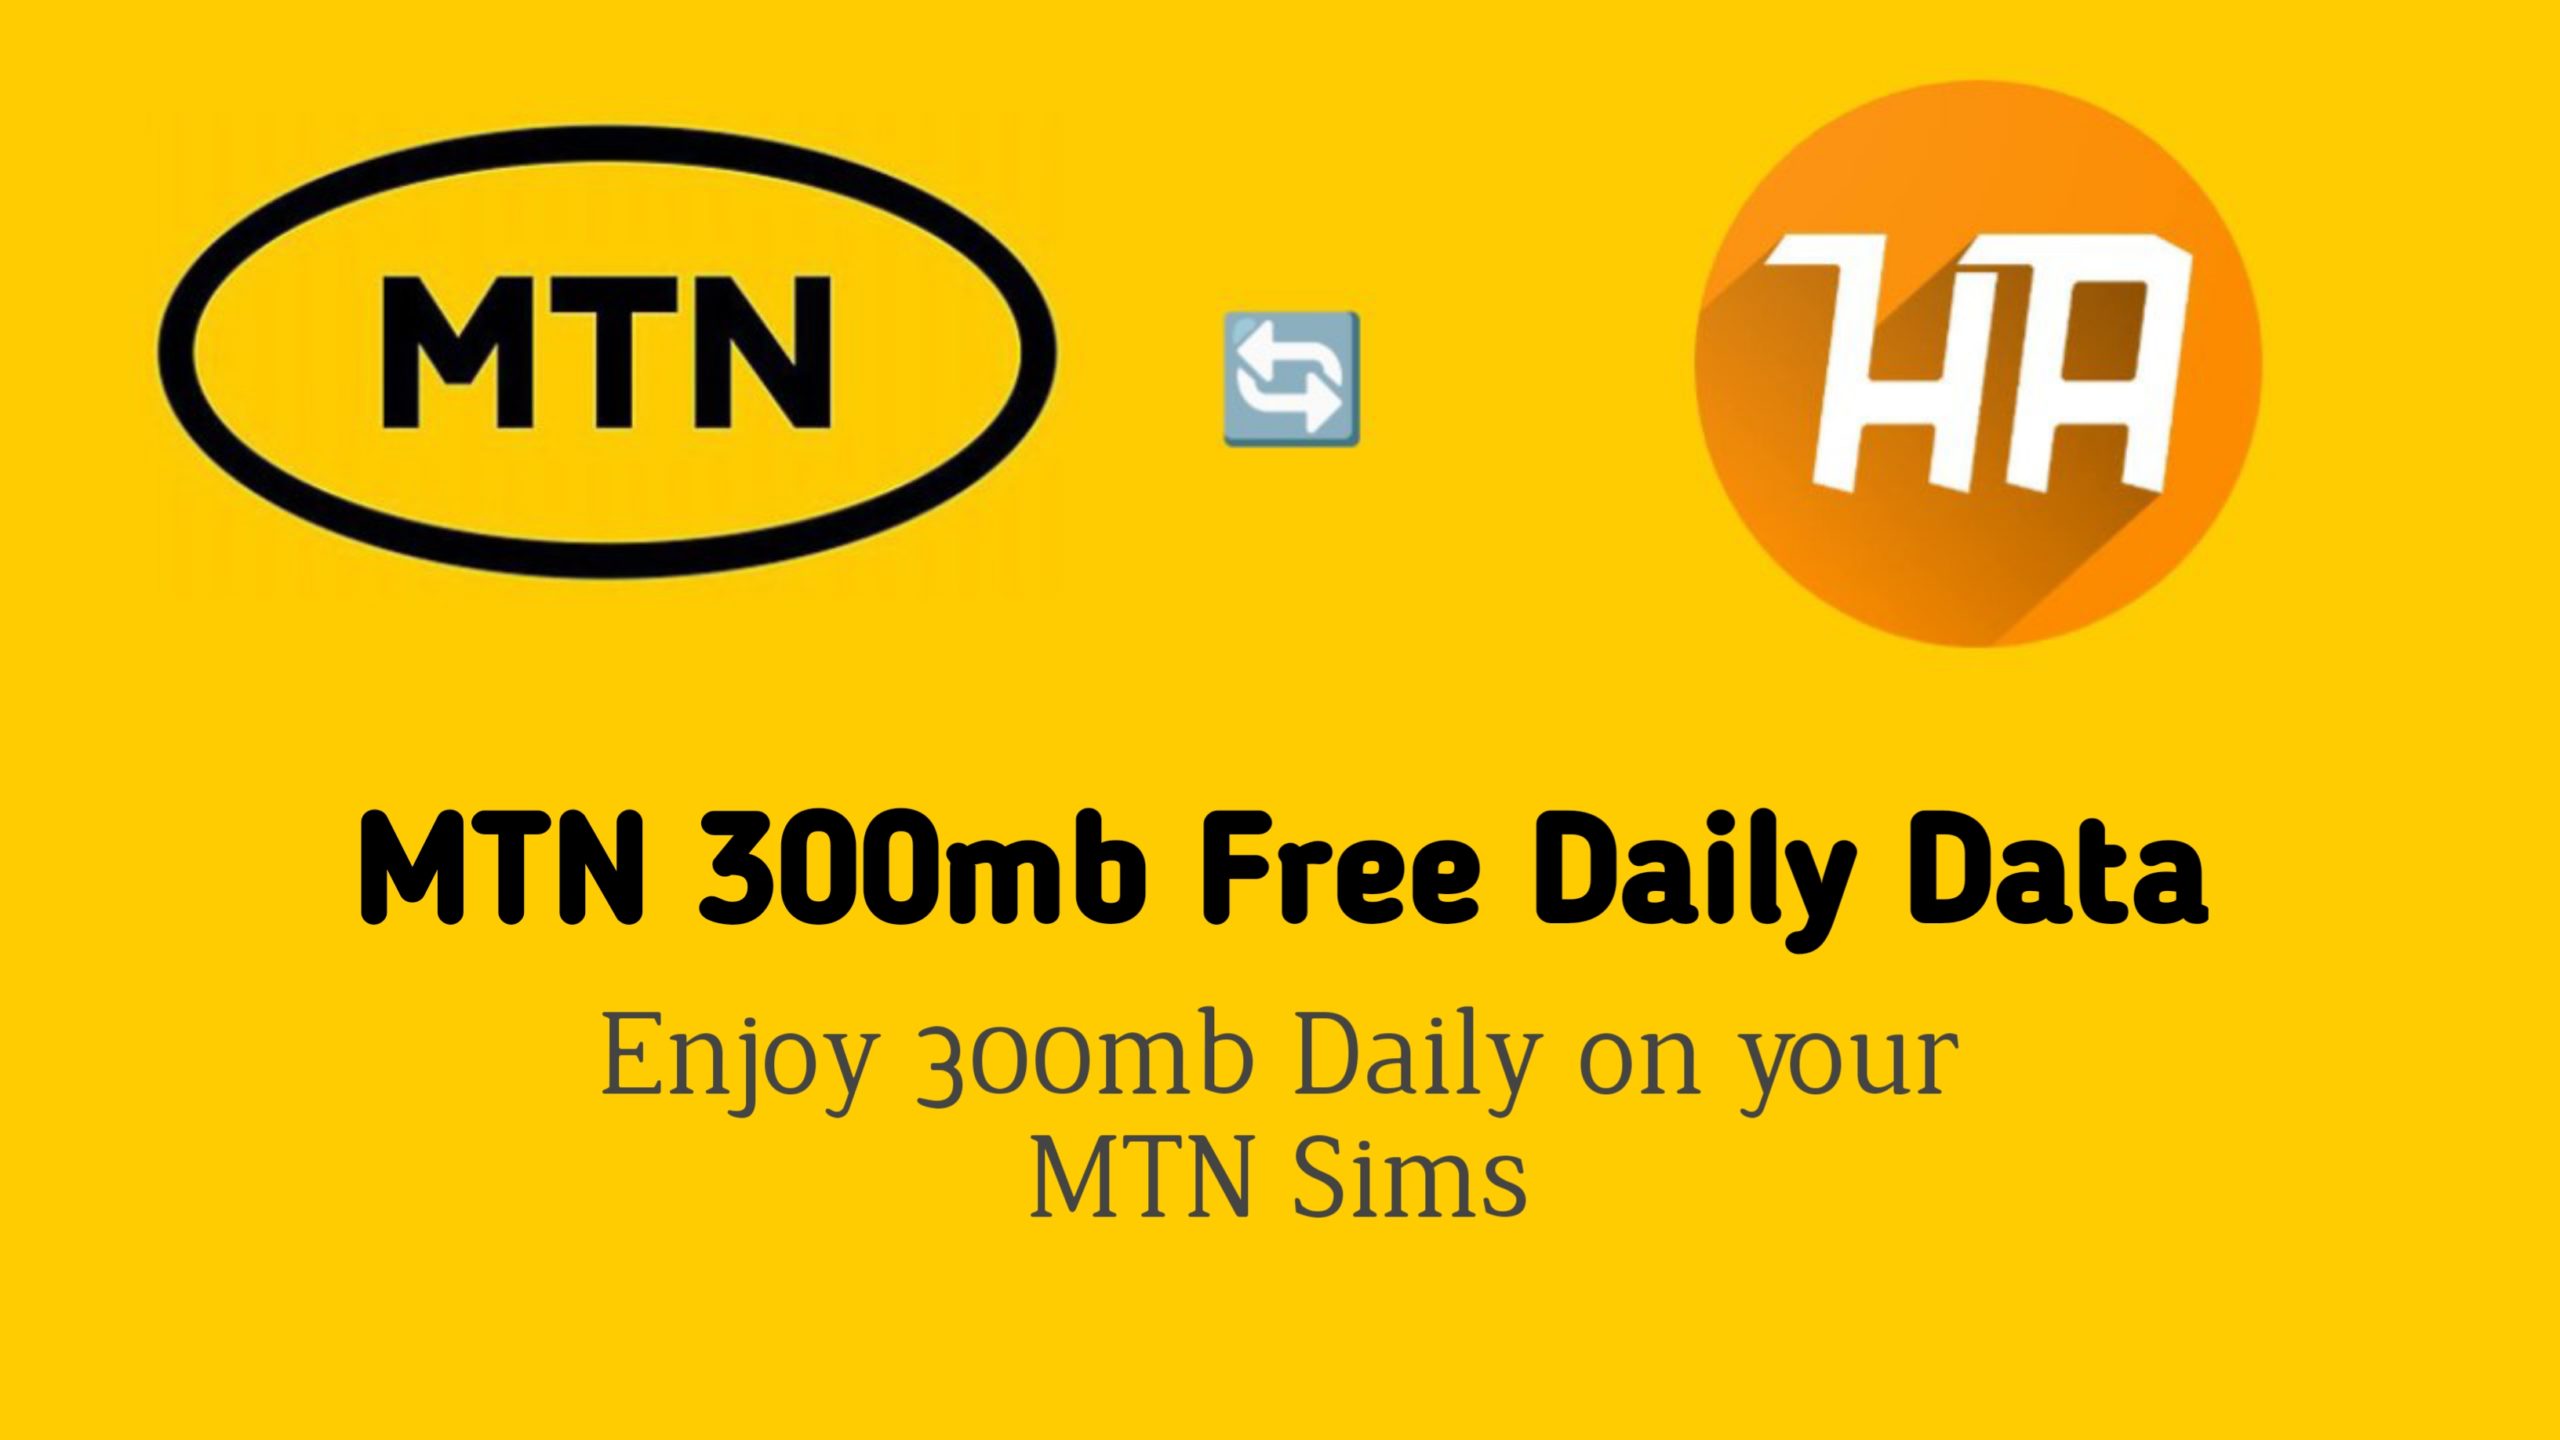 How to activate Free MTN 300mb Daily Data using VPN